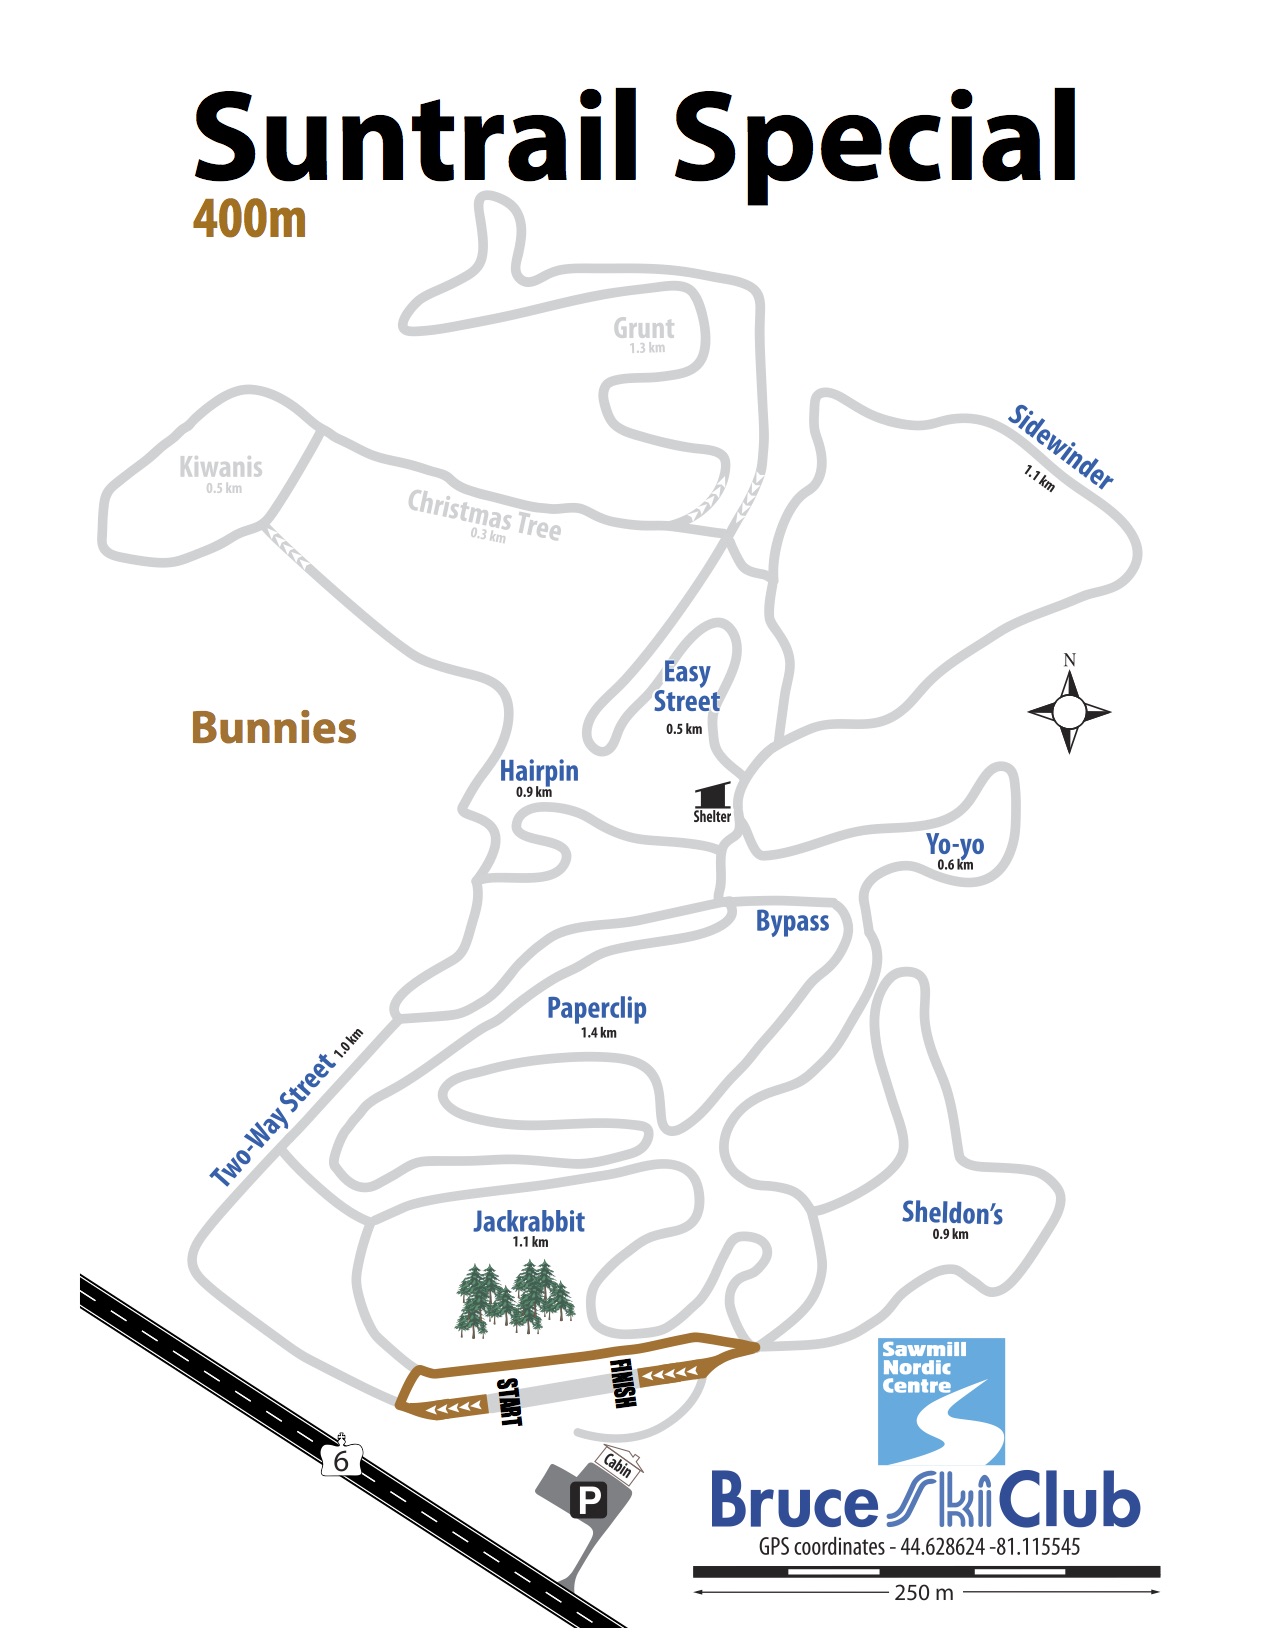 2019 Suntrail Special Cross-Country Ski Race Map – 400m